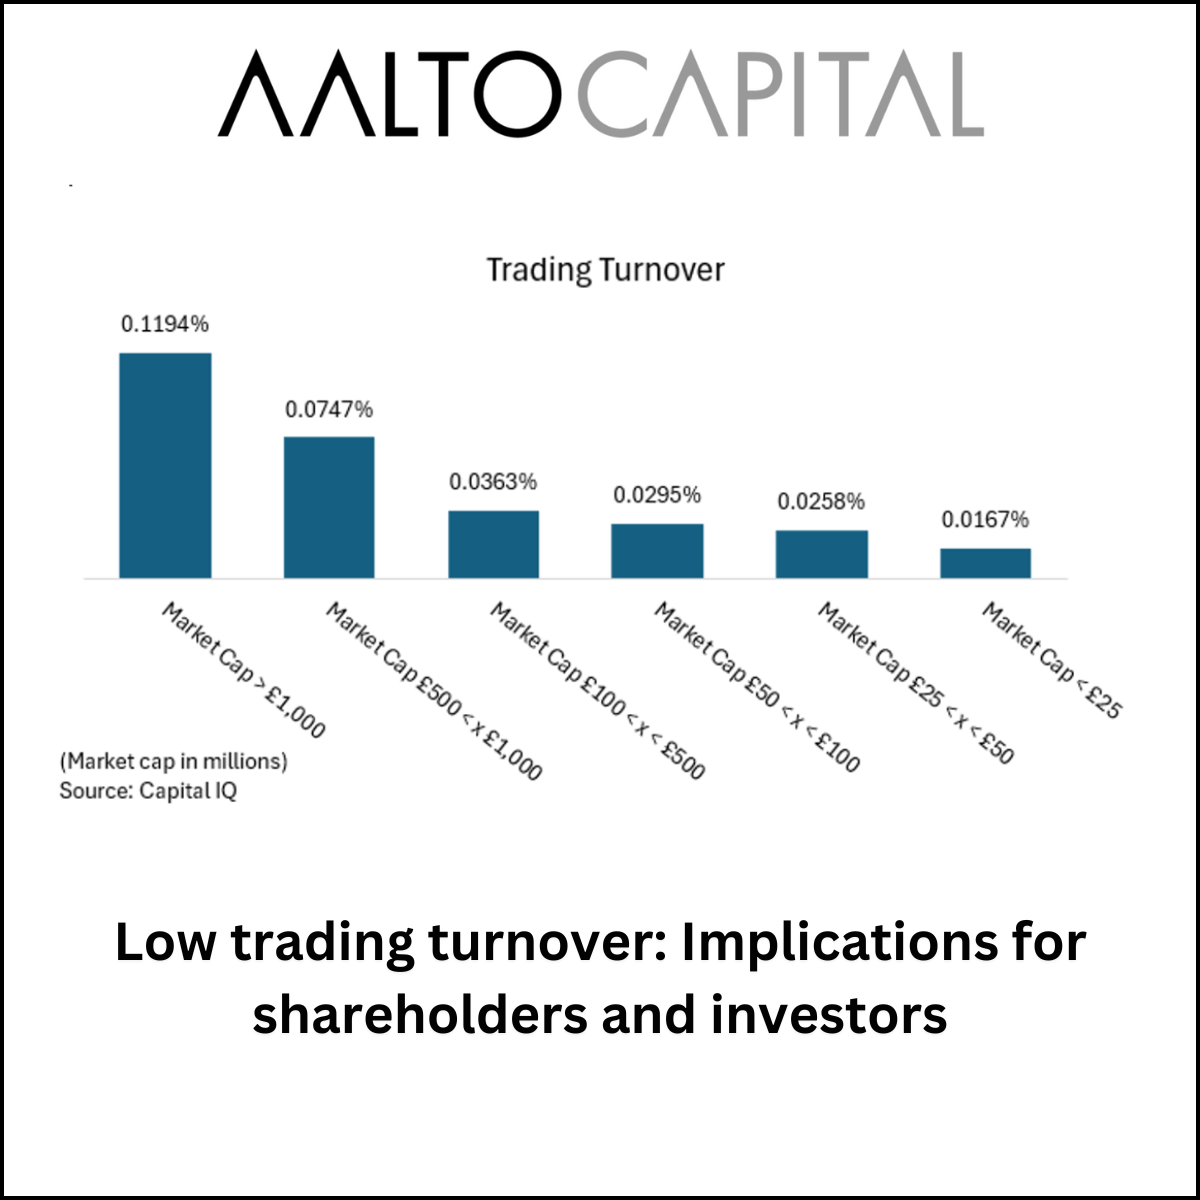 Low trading turnover: Implications for shareholders and investors